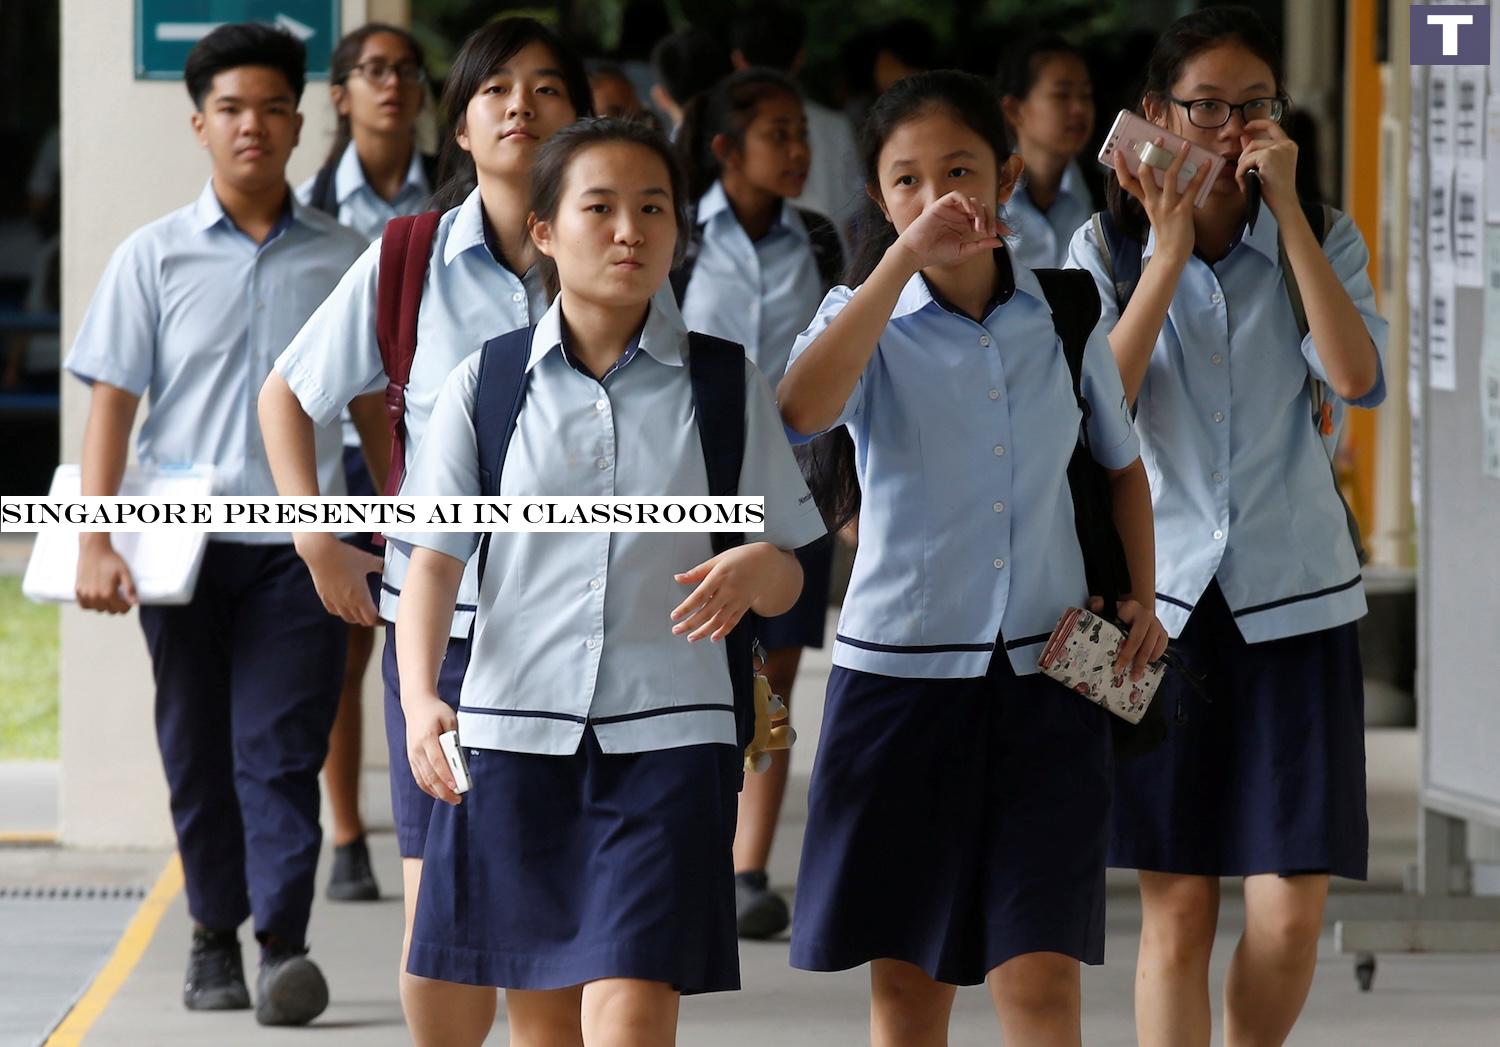 Singapore introduces AI in classrooms